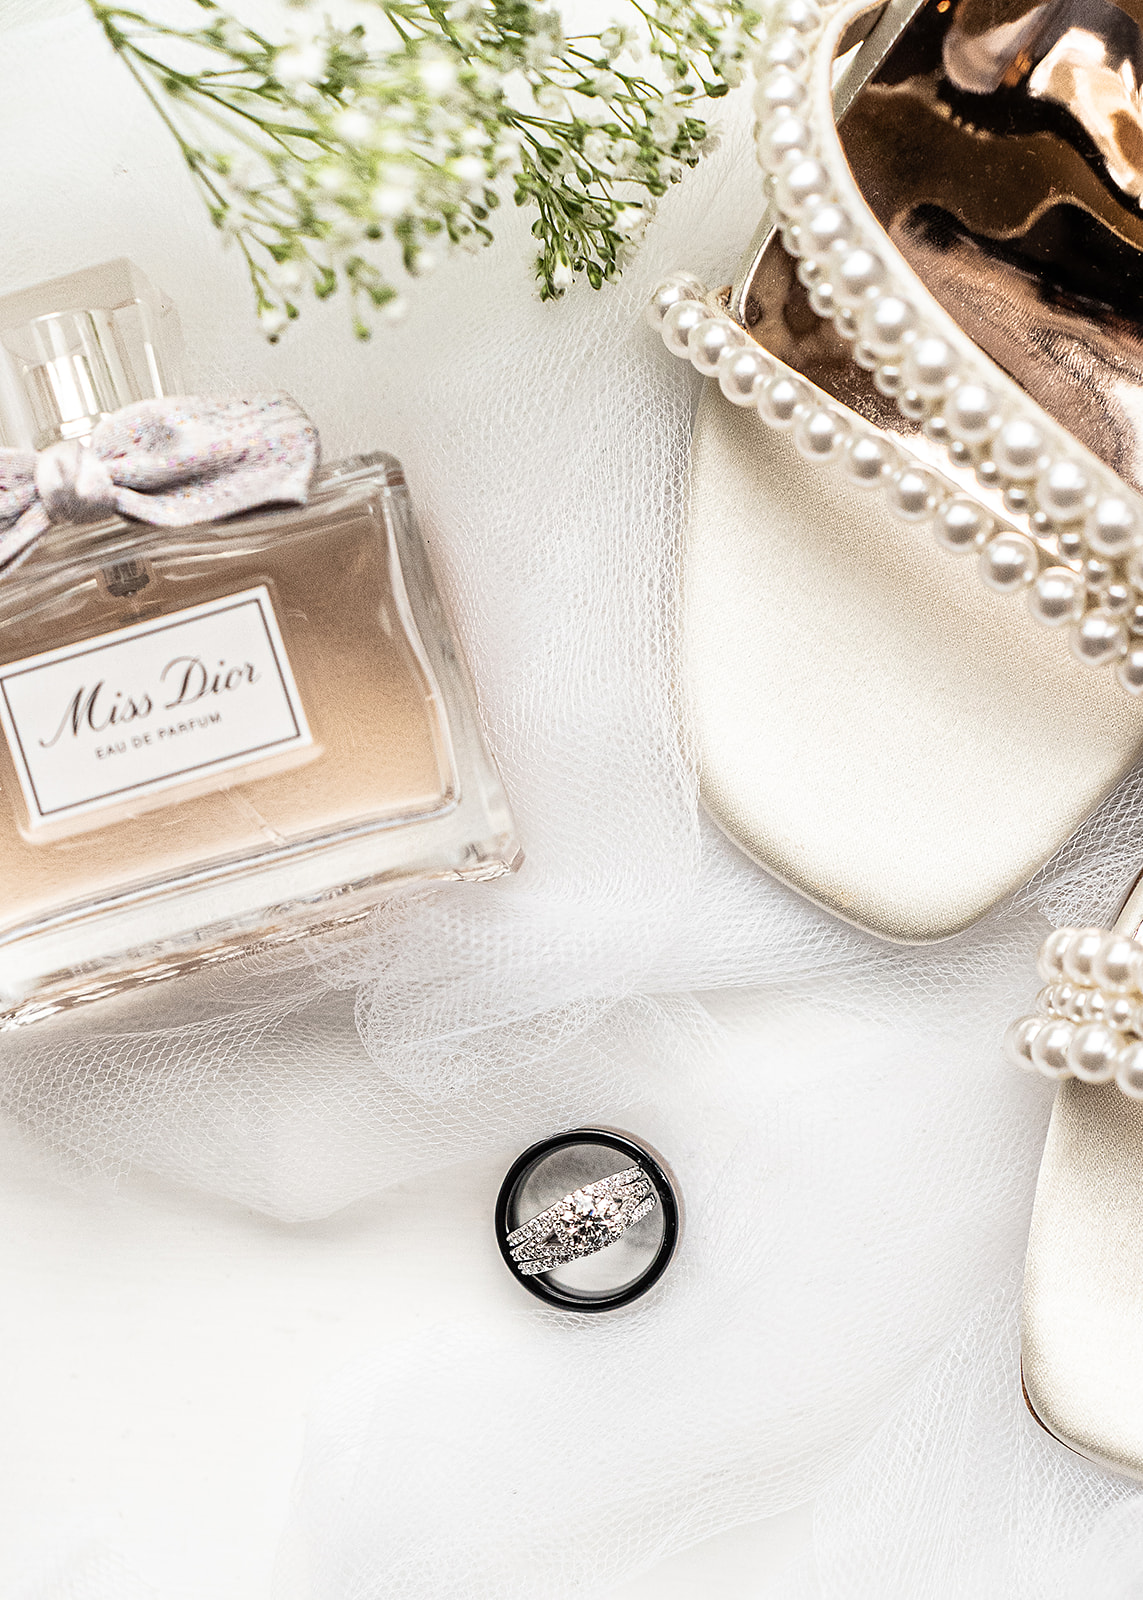 Elegant wedding details with Dior purfume rings and brides shoes